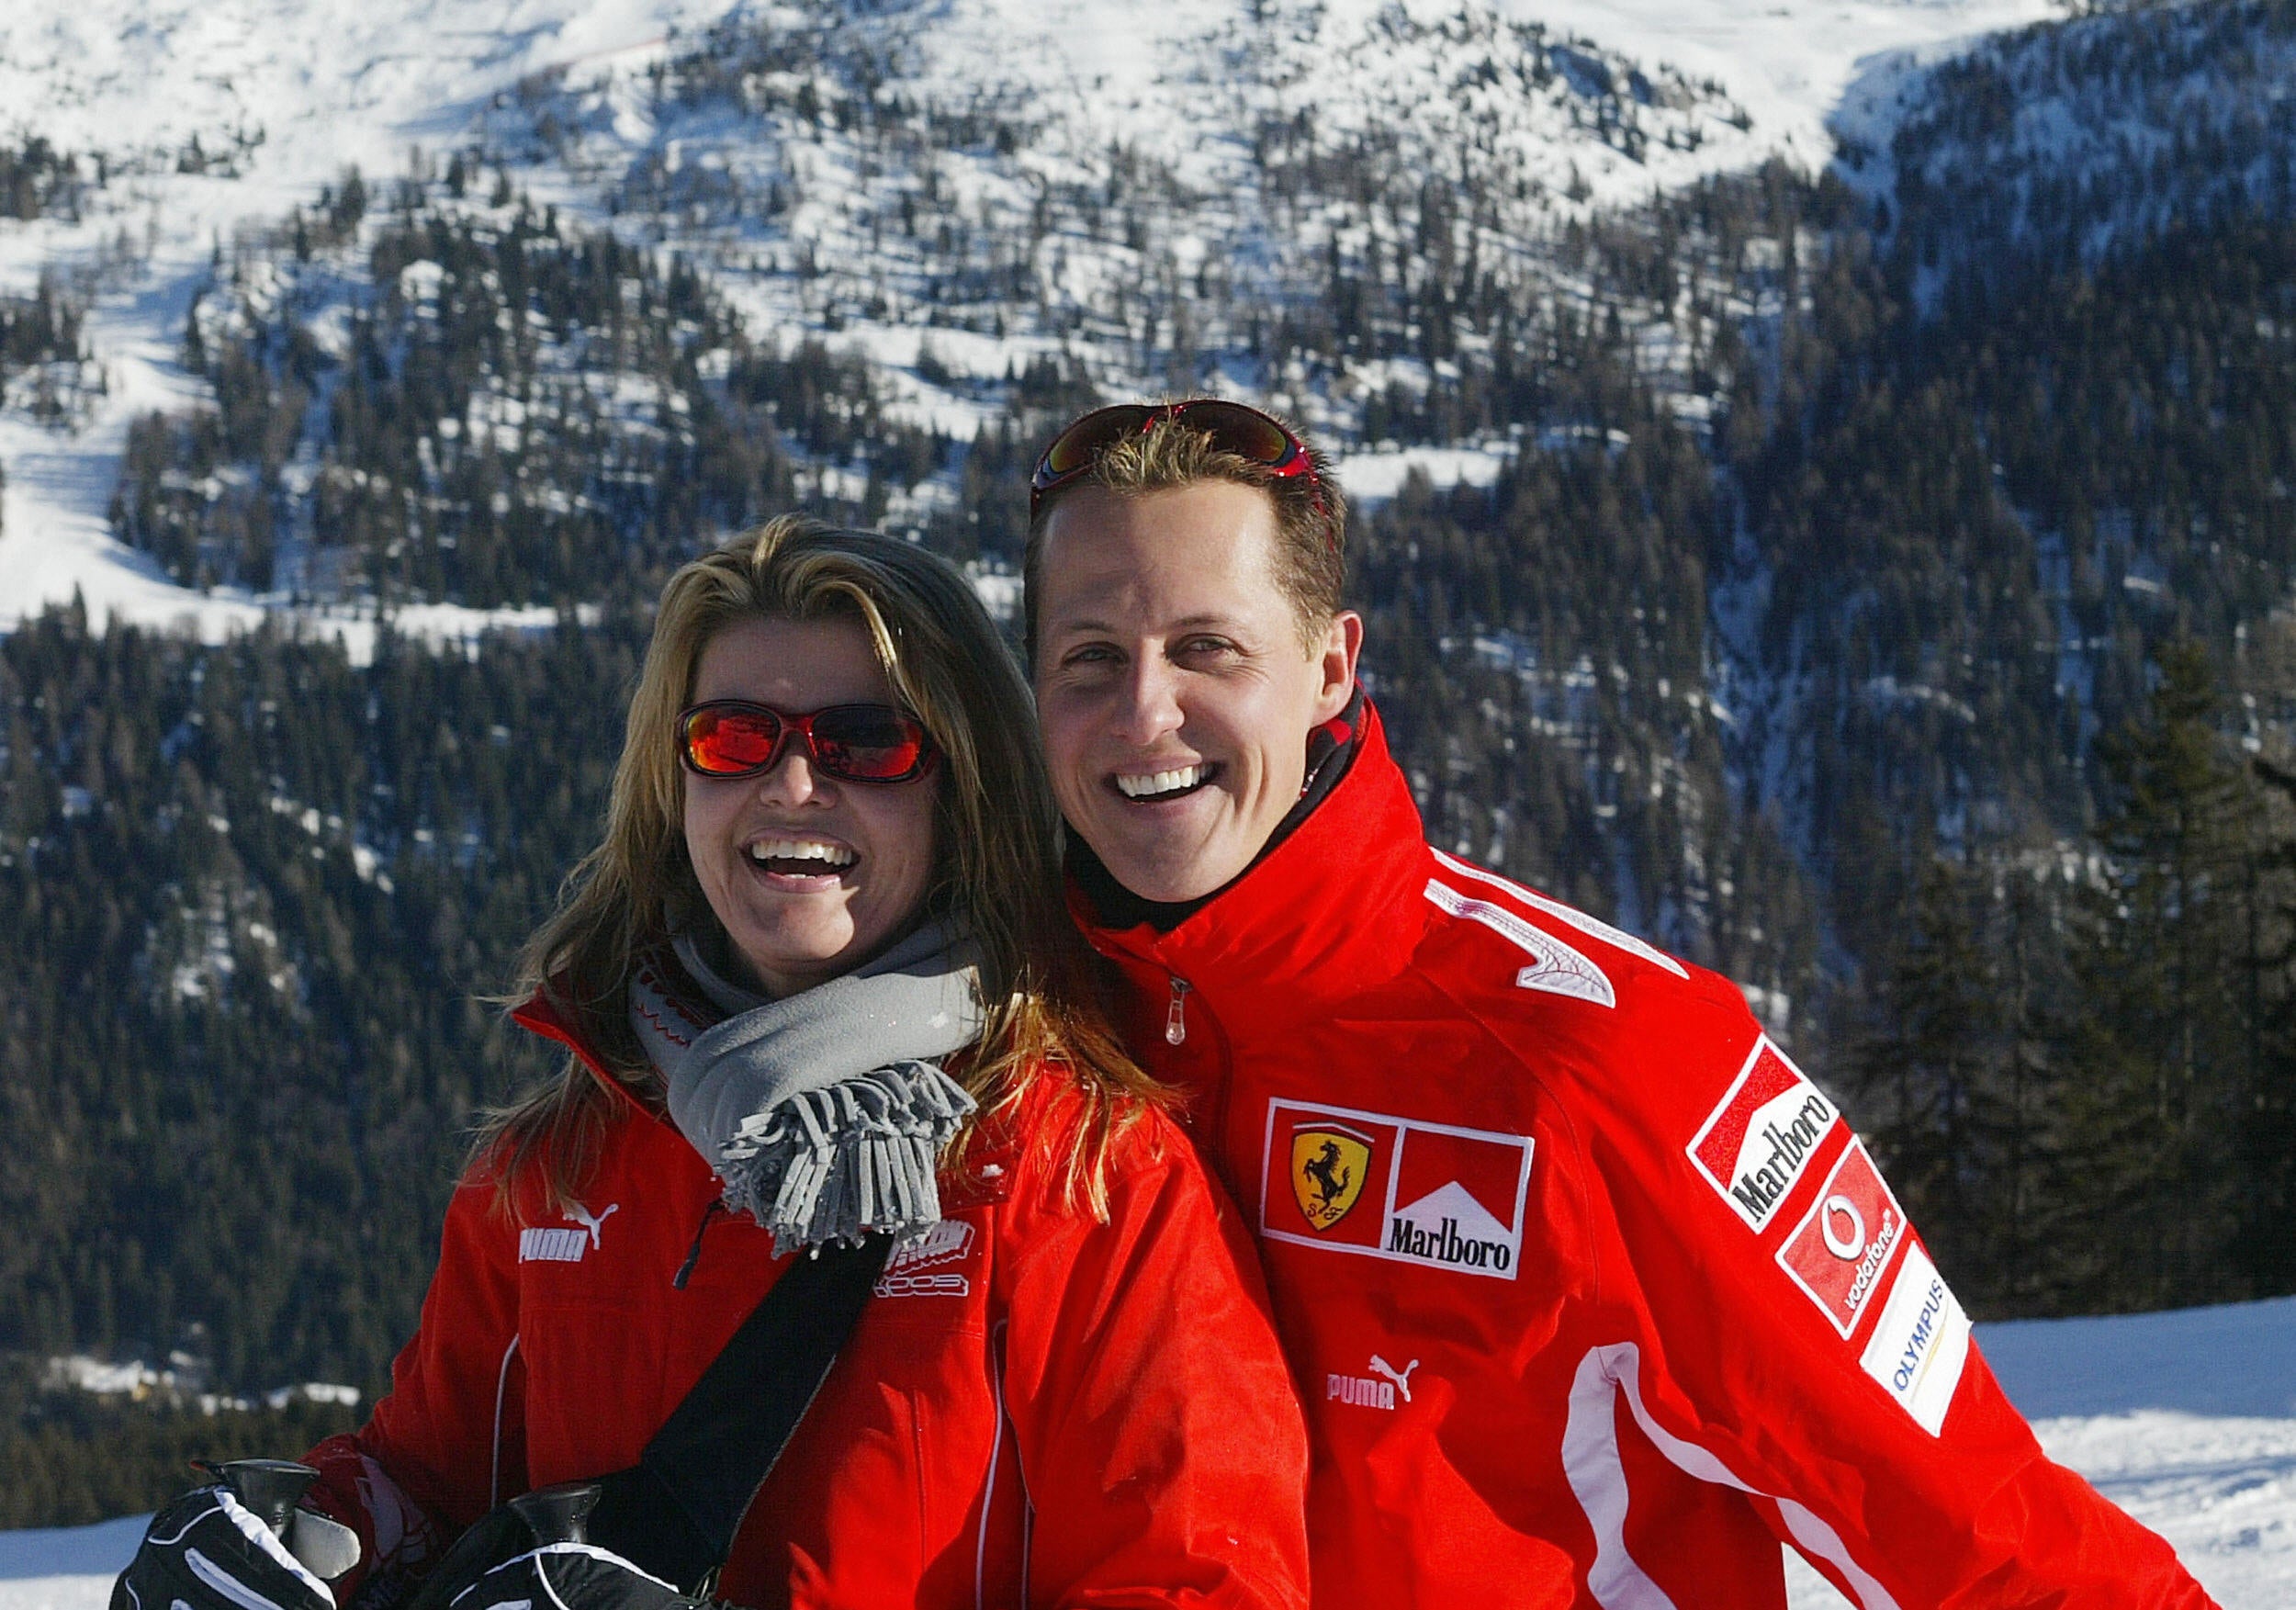 Schumacher has not been seen publicly for 10 years, with his medical condition kept private by wife Corinna (left)